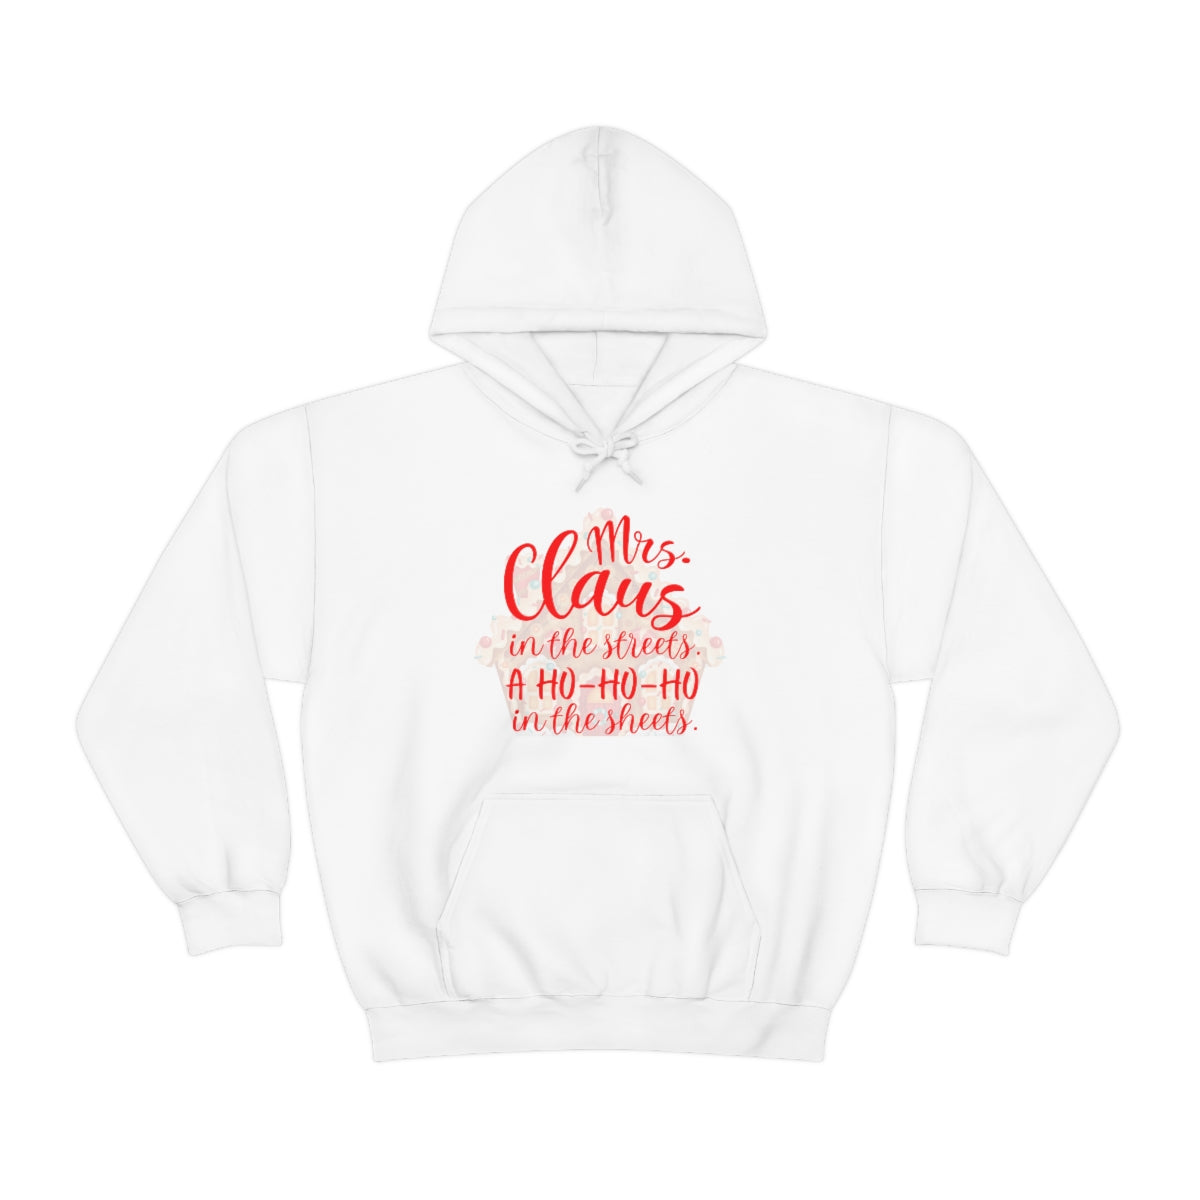 Mrs. Claus in the streets Ho Ho Ho in the sheets Unisex Heavy Blend™ Hooded Sweatshirt